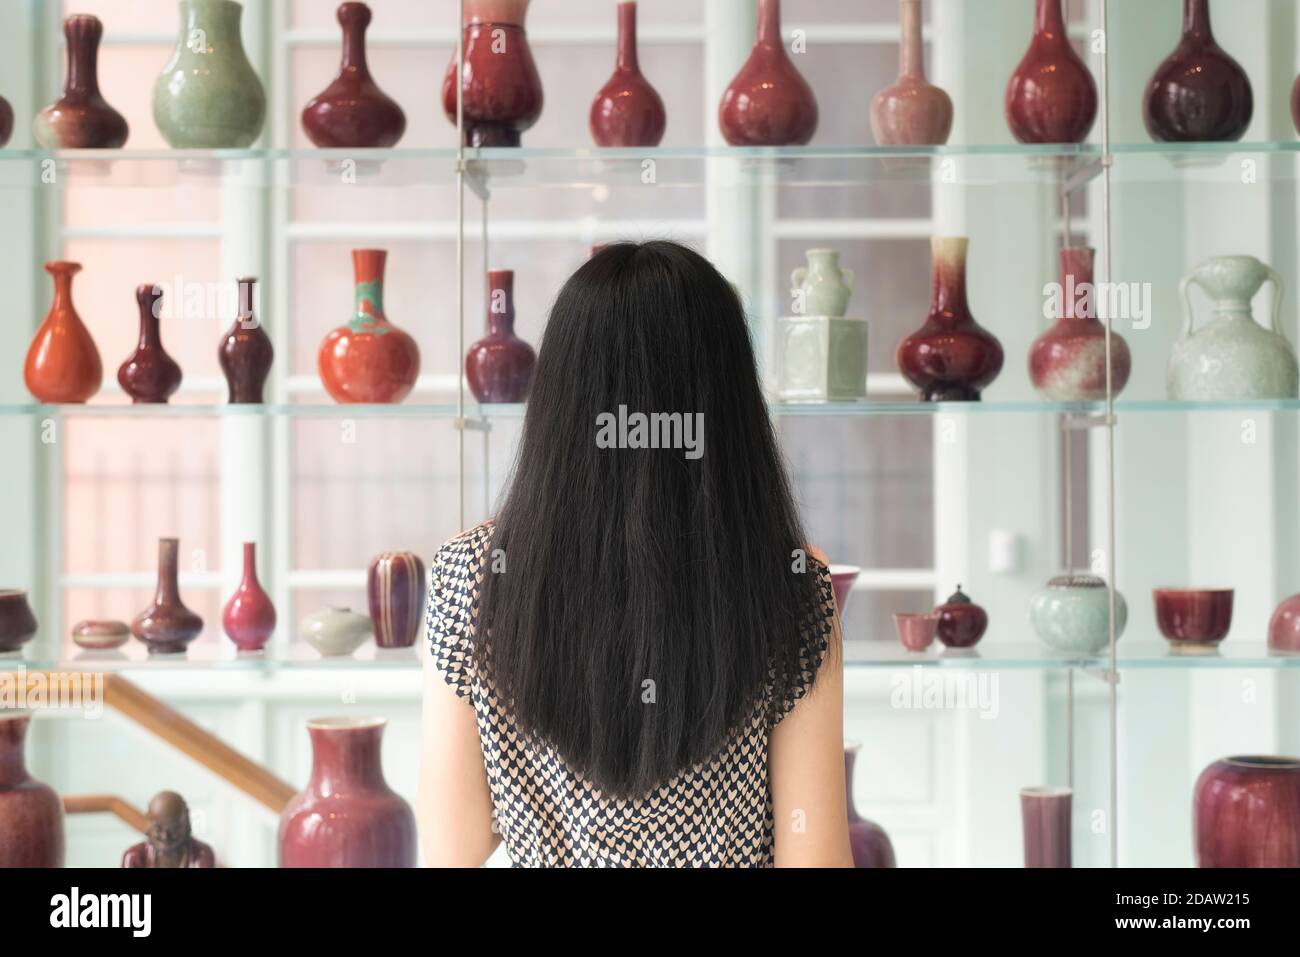 A chinese woman looking at a shelf of various vases within the walters art museum in baltimore maryland. Stock Photo